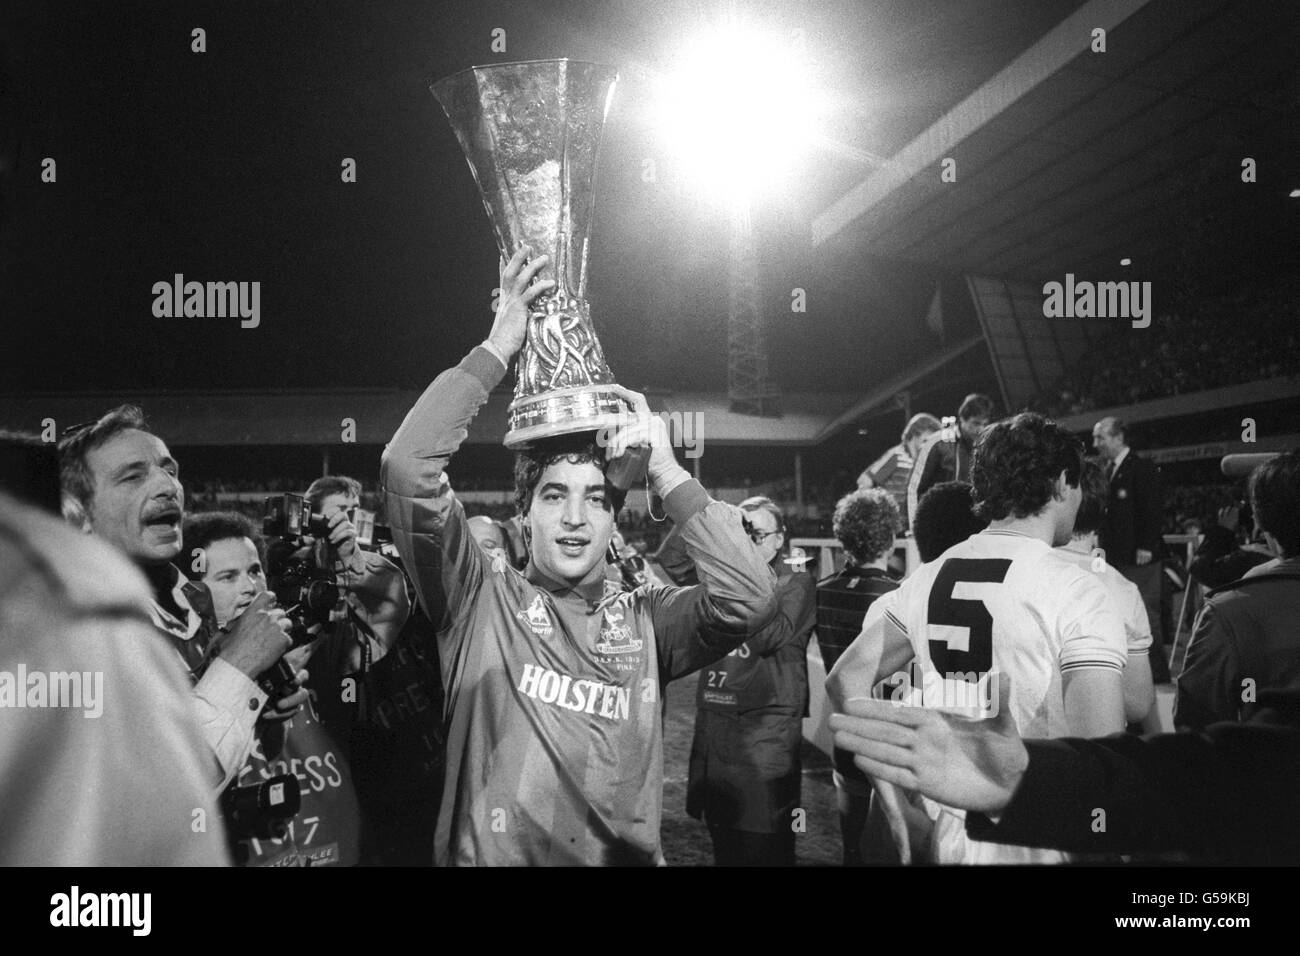 Tottenham Hotspur's young goalkeeper Tony Parks with the UEFA Cup trophy at White Hart Lane in London. The young goalie saved two penalties against Anderlecht after extra-time in the UEFA Cup Final second leg. With the score at 1-1 (2-2 agg) after extra time, Spurs won the trophy by beating the Belgian side 4-3 in a penalty shoot-out. Stock Photo